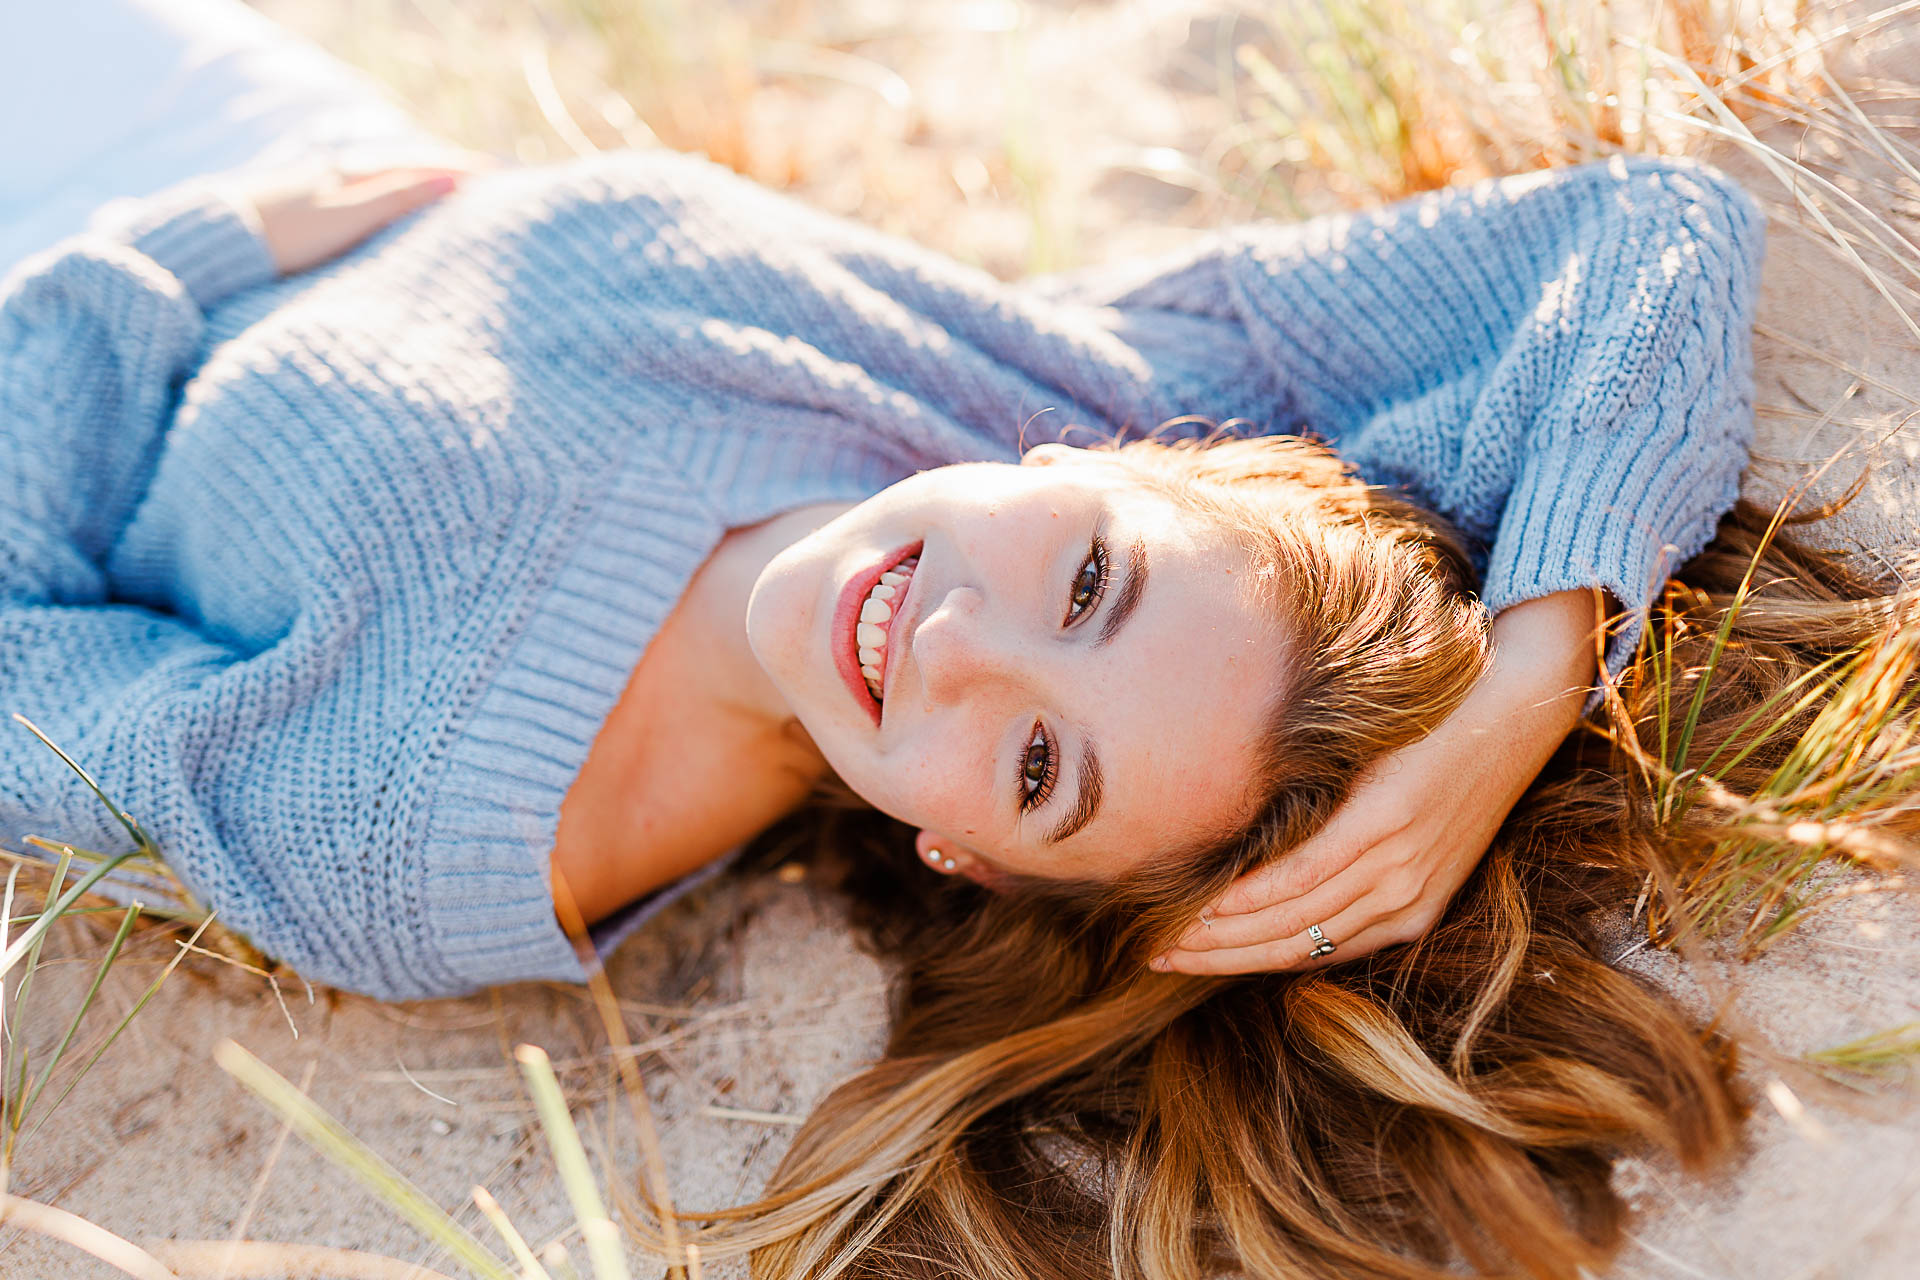 Photo by Cohasset senior photographer Christina Runnals | High school senior girl laying on the sand at a Cohasset beach and smiling